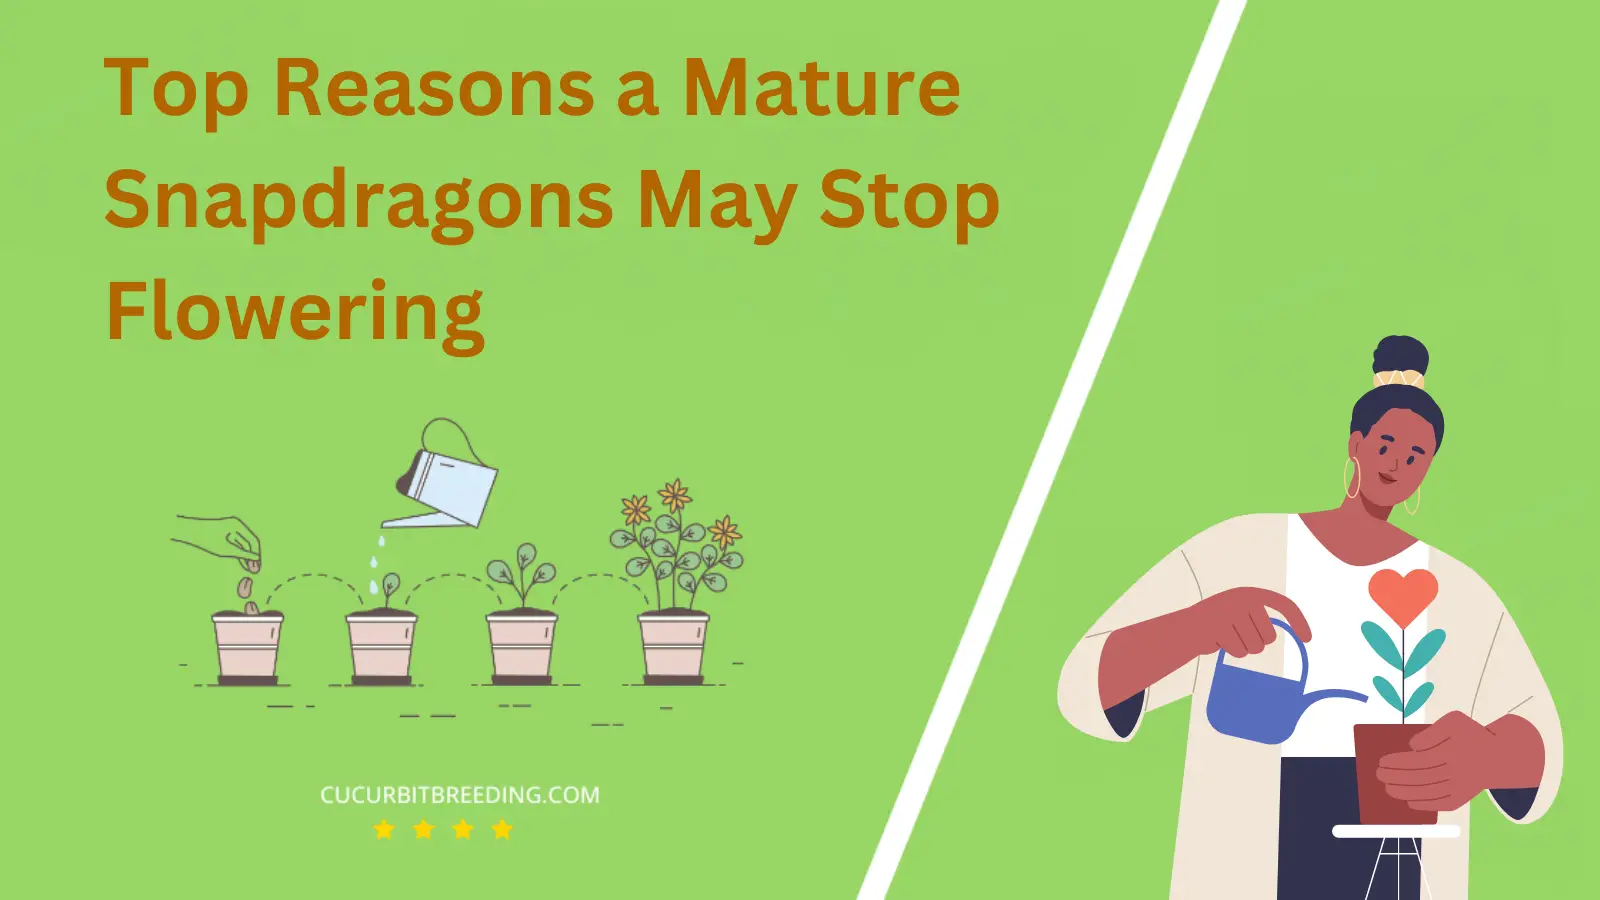 Top Reasons a Mature Snapdragons May Stop Flowering